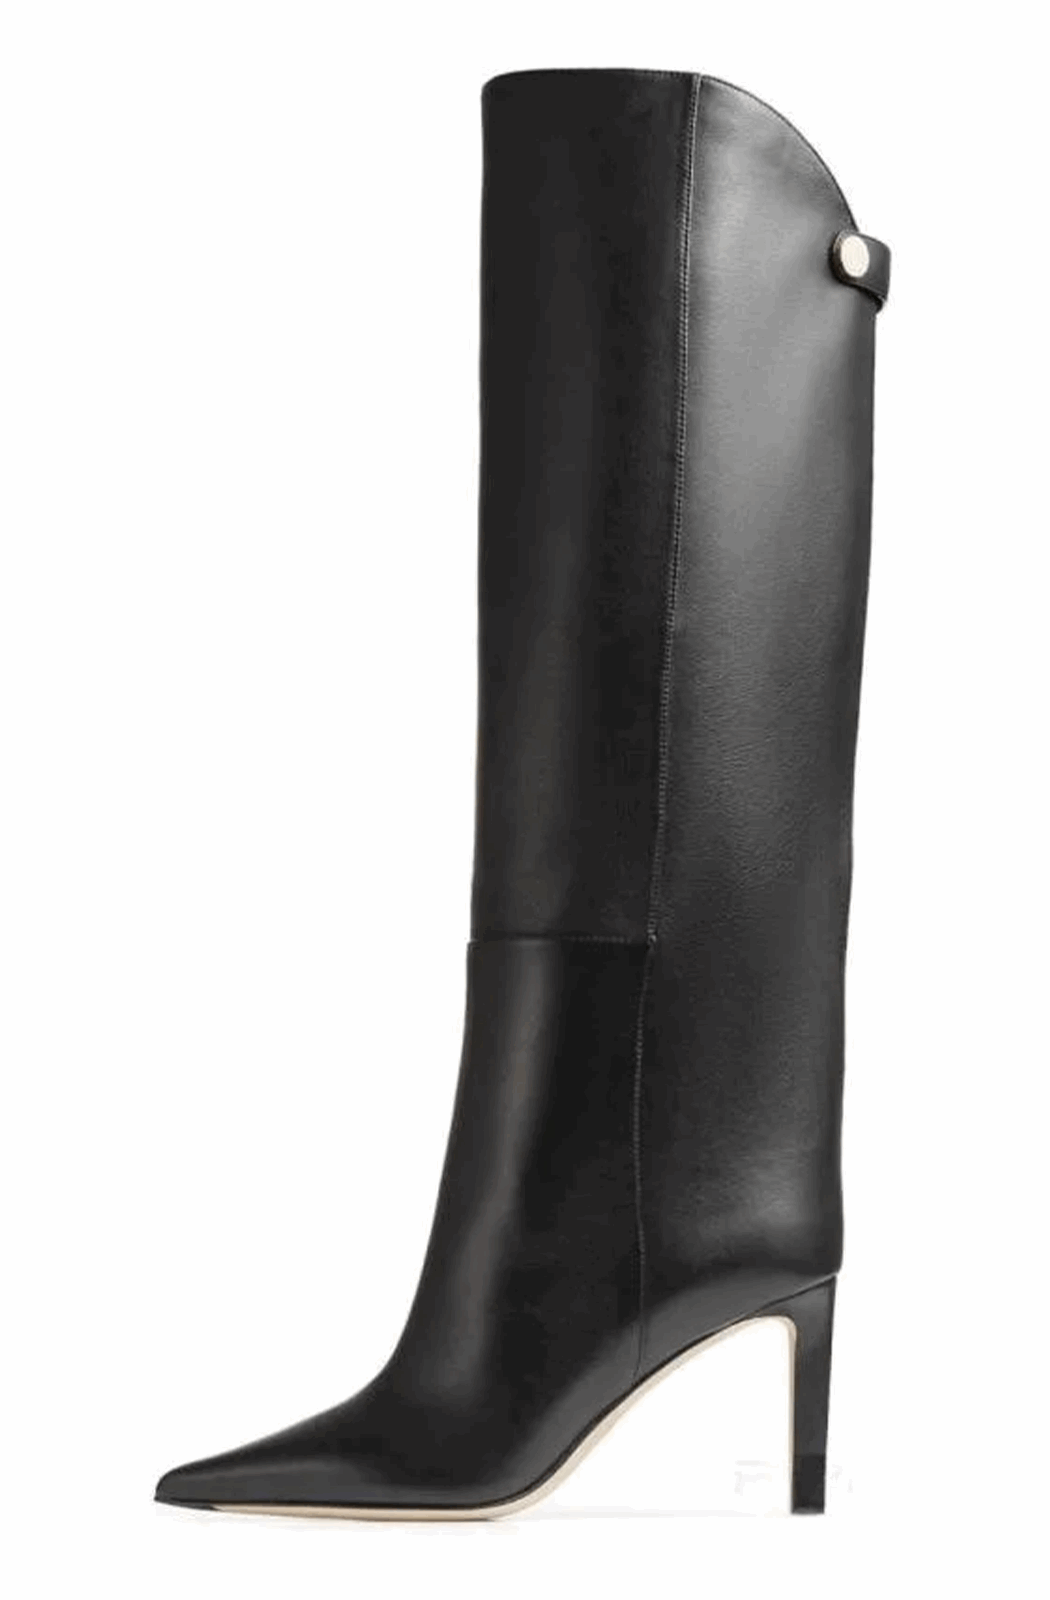 Pointed toe knee boots